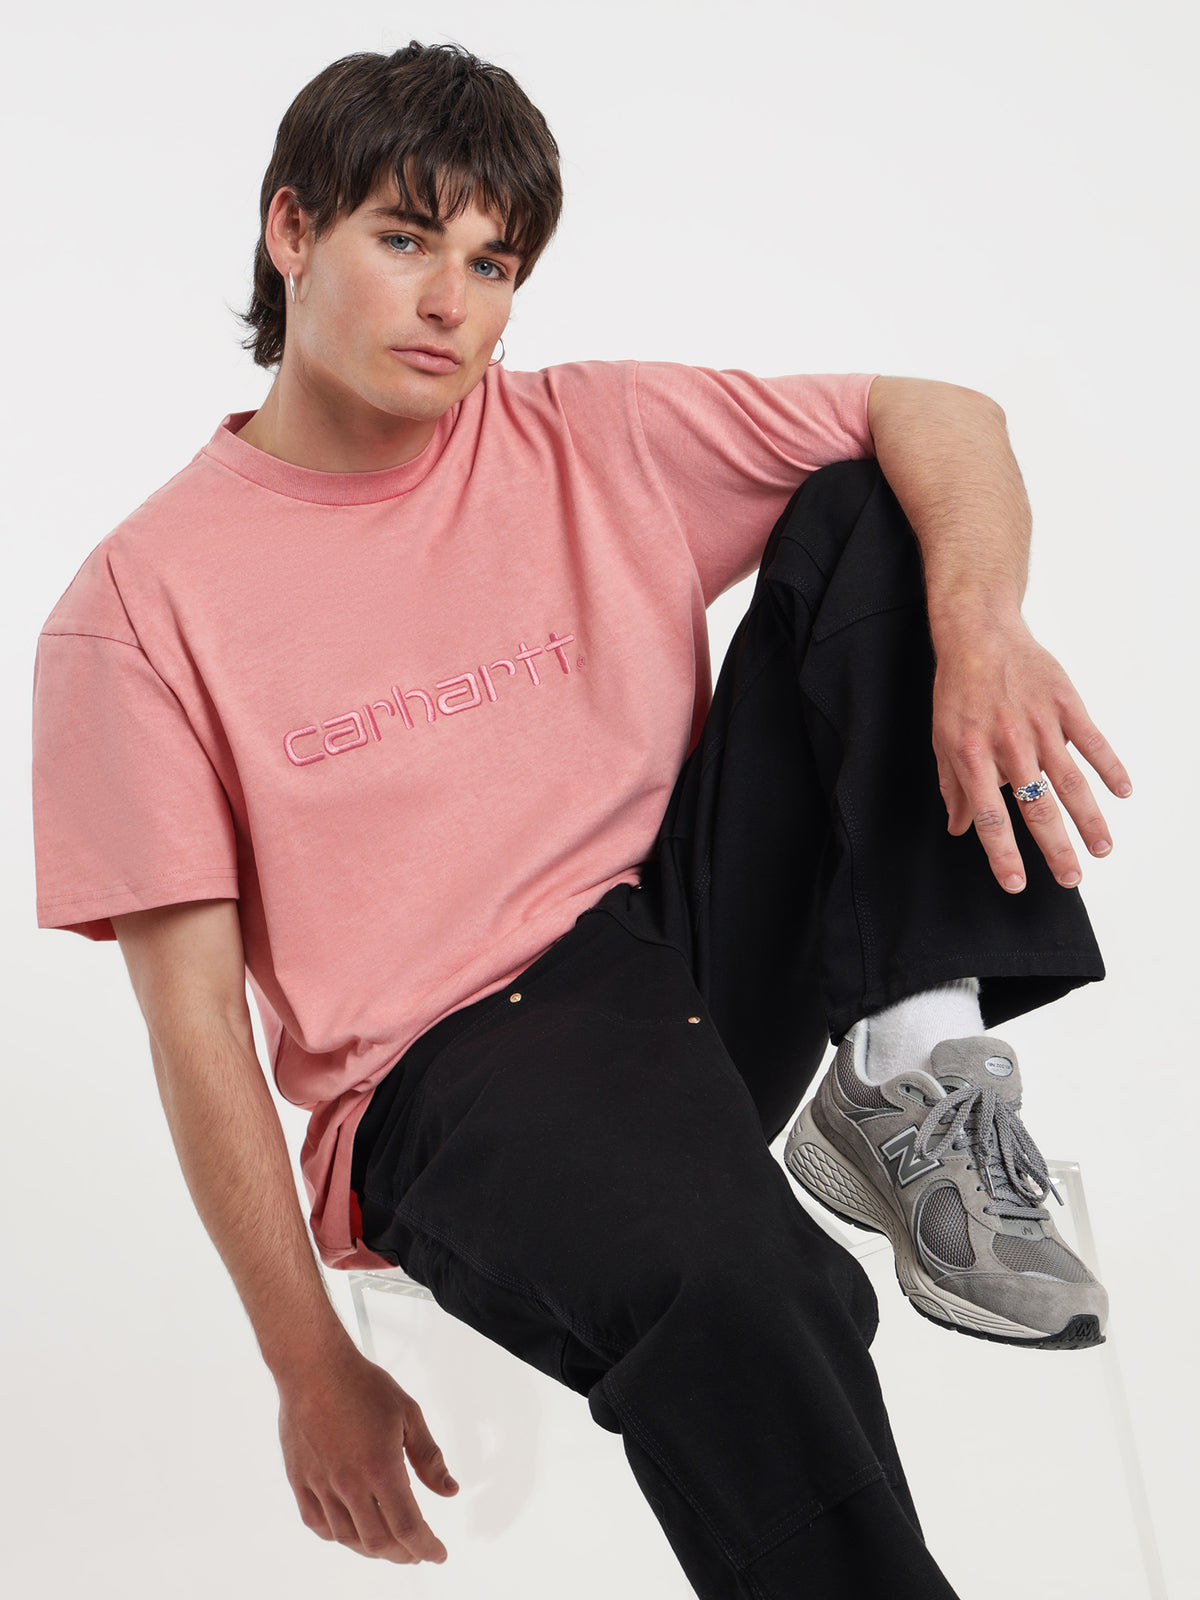 Duster T-Shirt in Pink